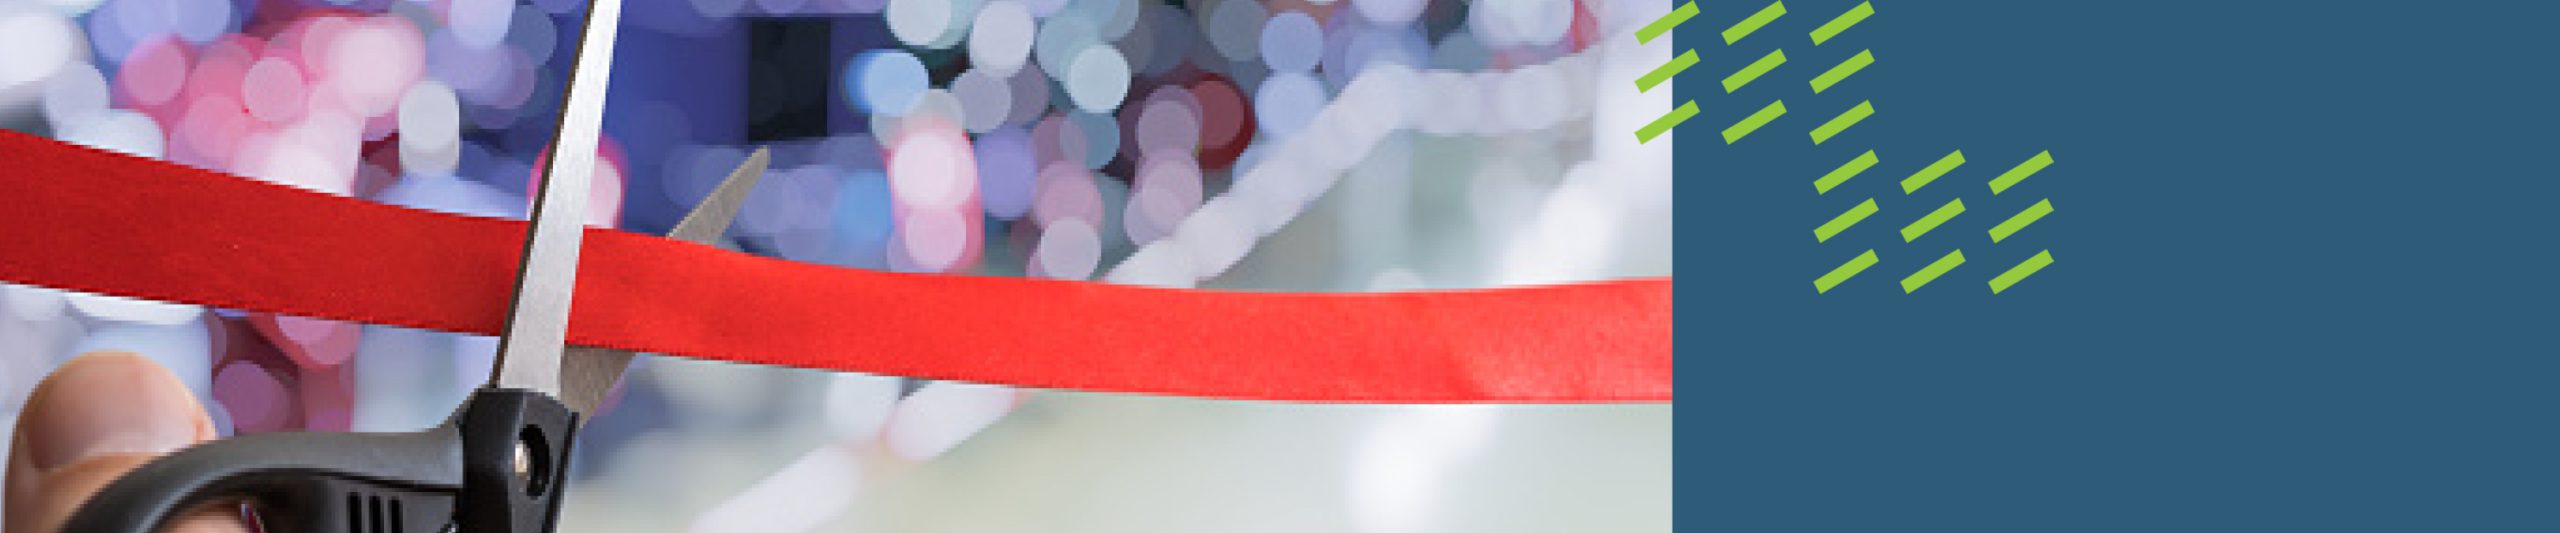 image of scissors cutting a red ribbon in front of a crowd